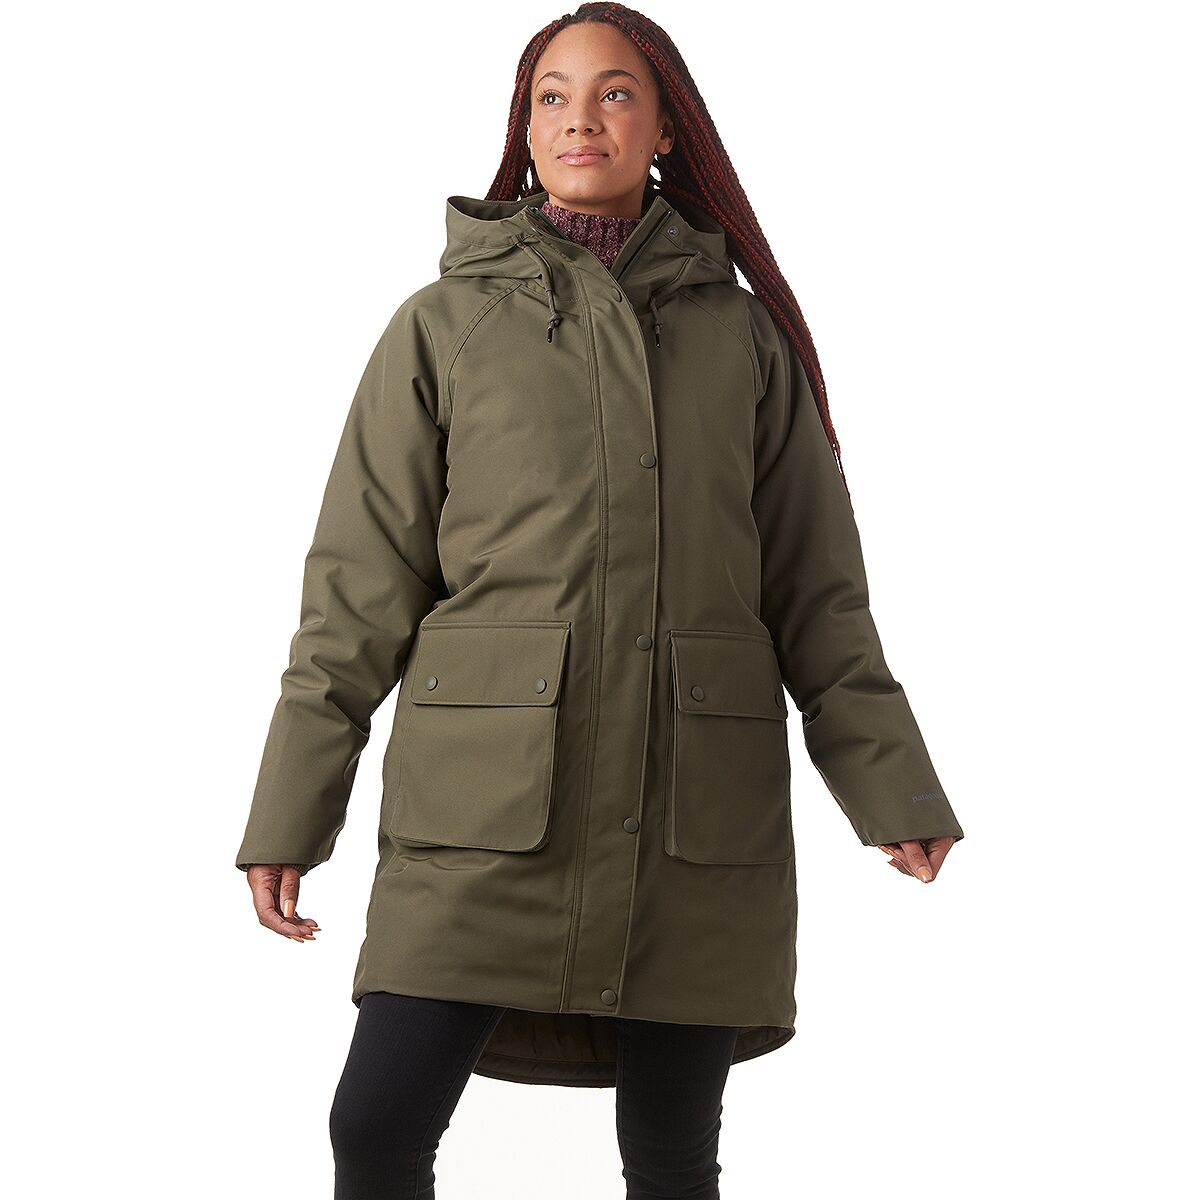 Marty Fielding Samarbejdsvillig perspektiv Patagonia Great Falls Insulated Parka - Women's - Clothing